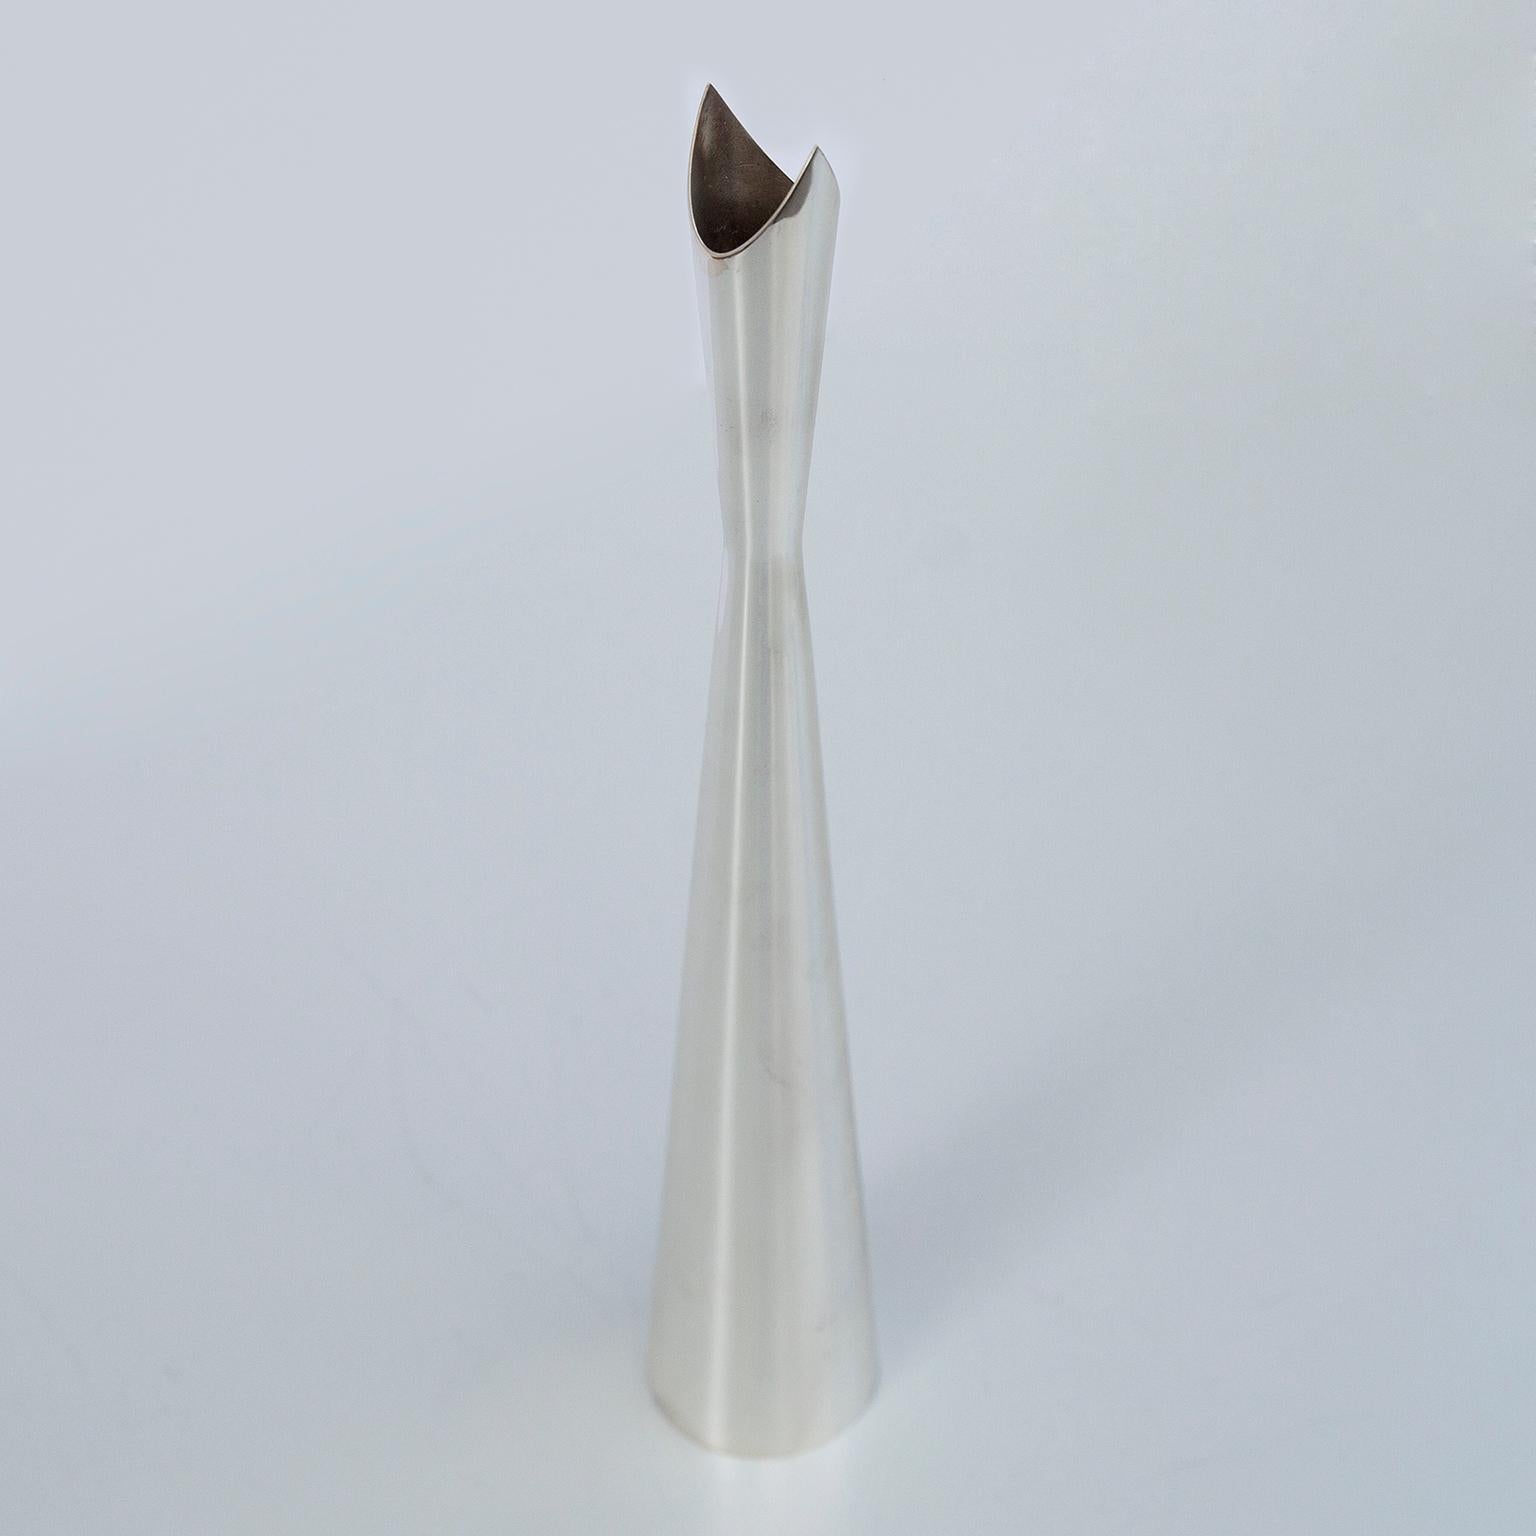 Cardinale vase designed by Lino Sabattini and manufactured by Christofle in France, 1950s. The vase is made of high quality silver plated metal and marked on the bottom. Excellent original vintage condition.